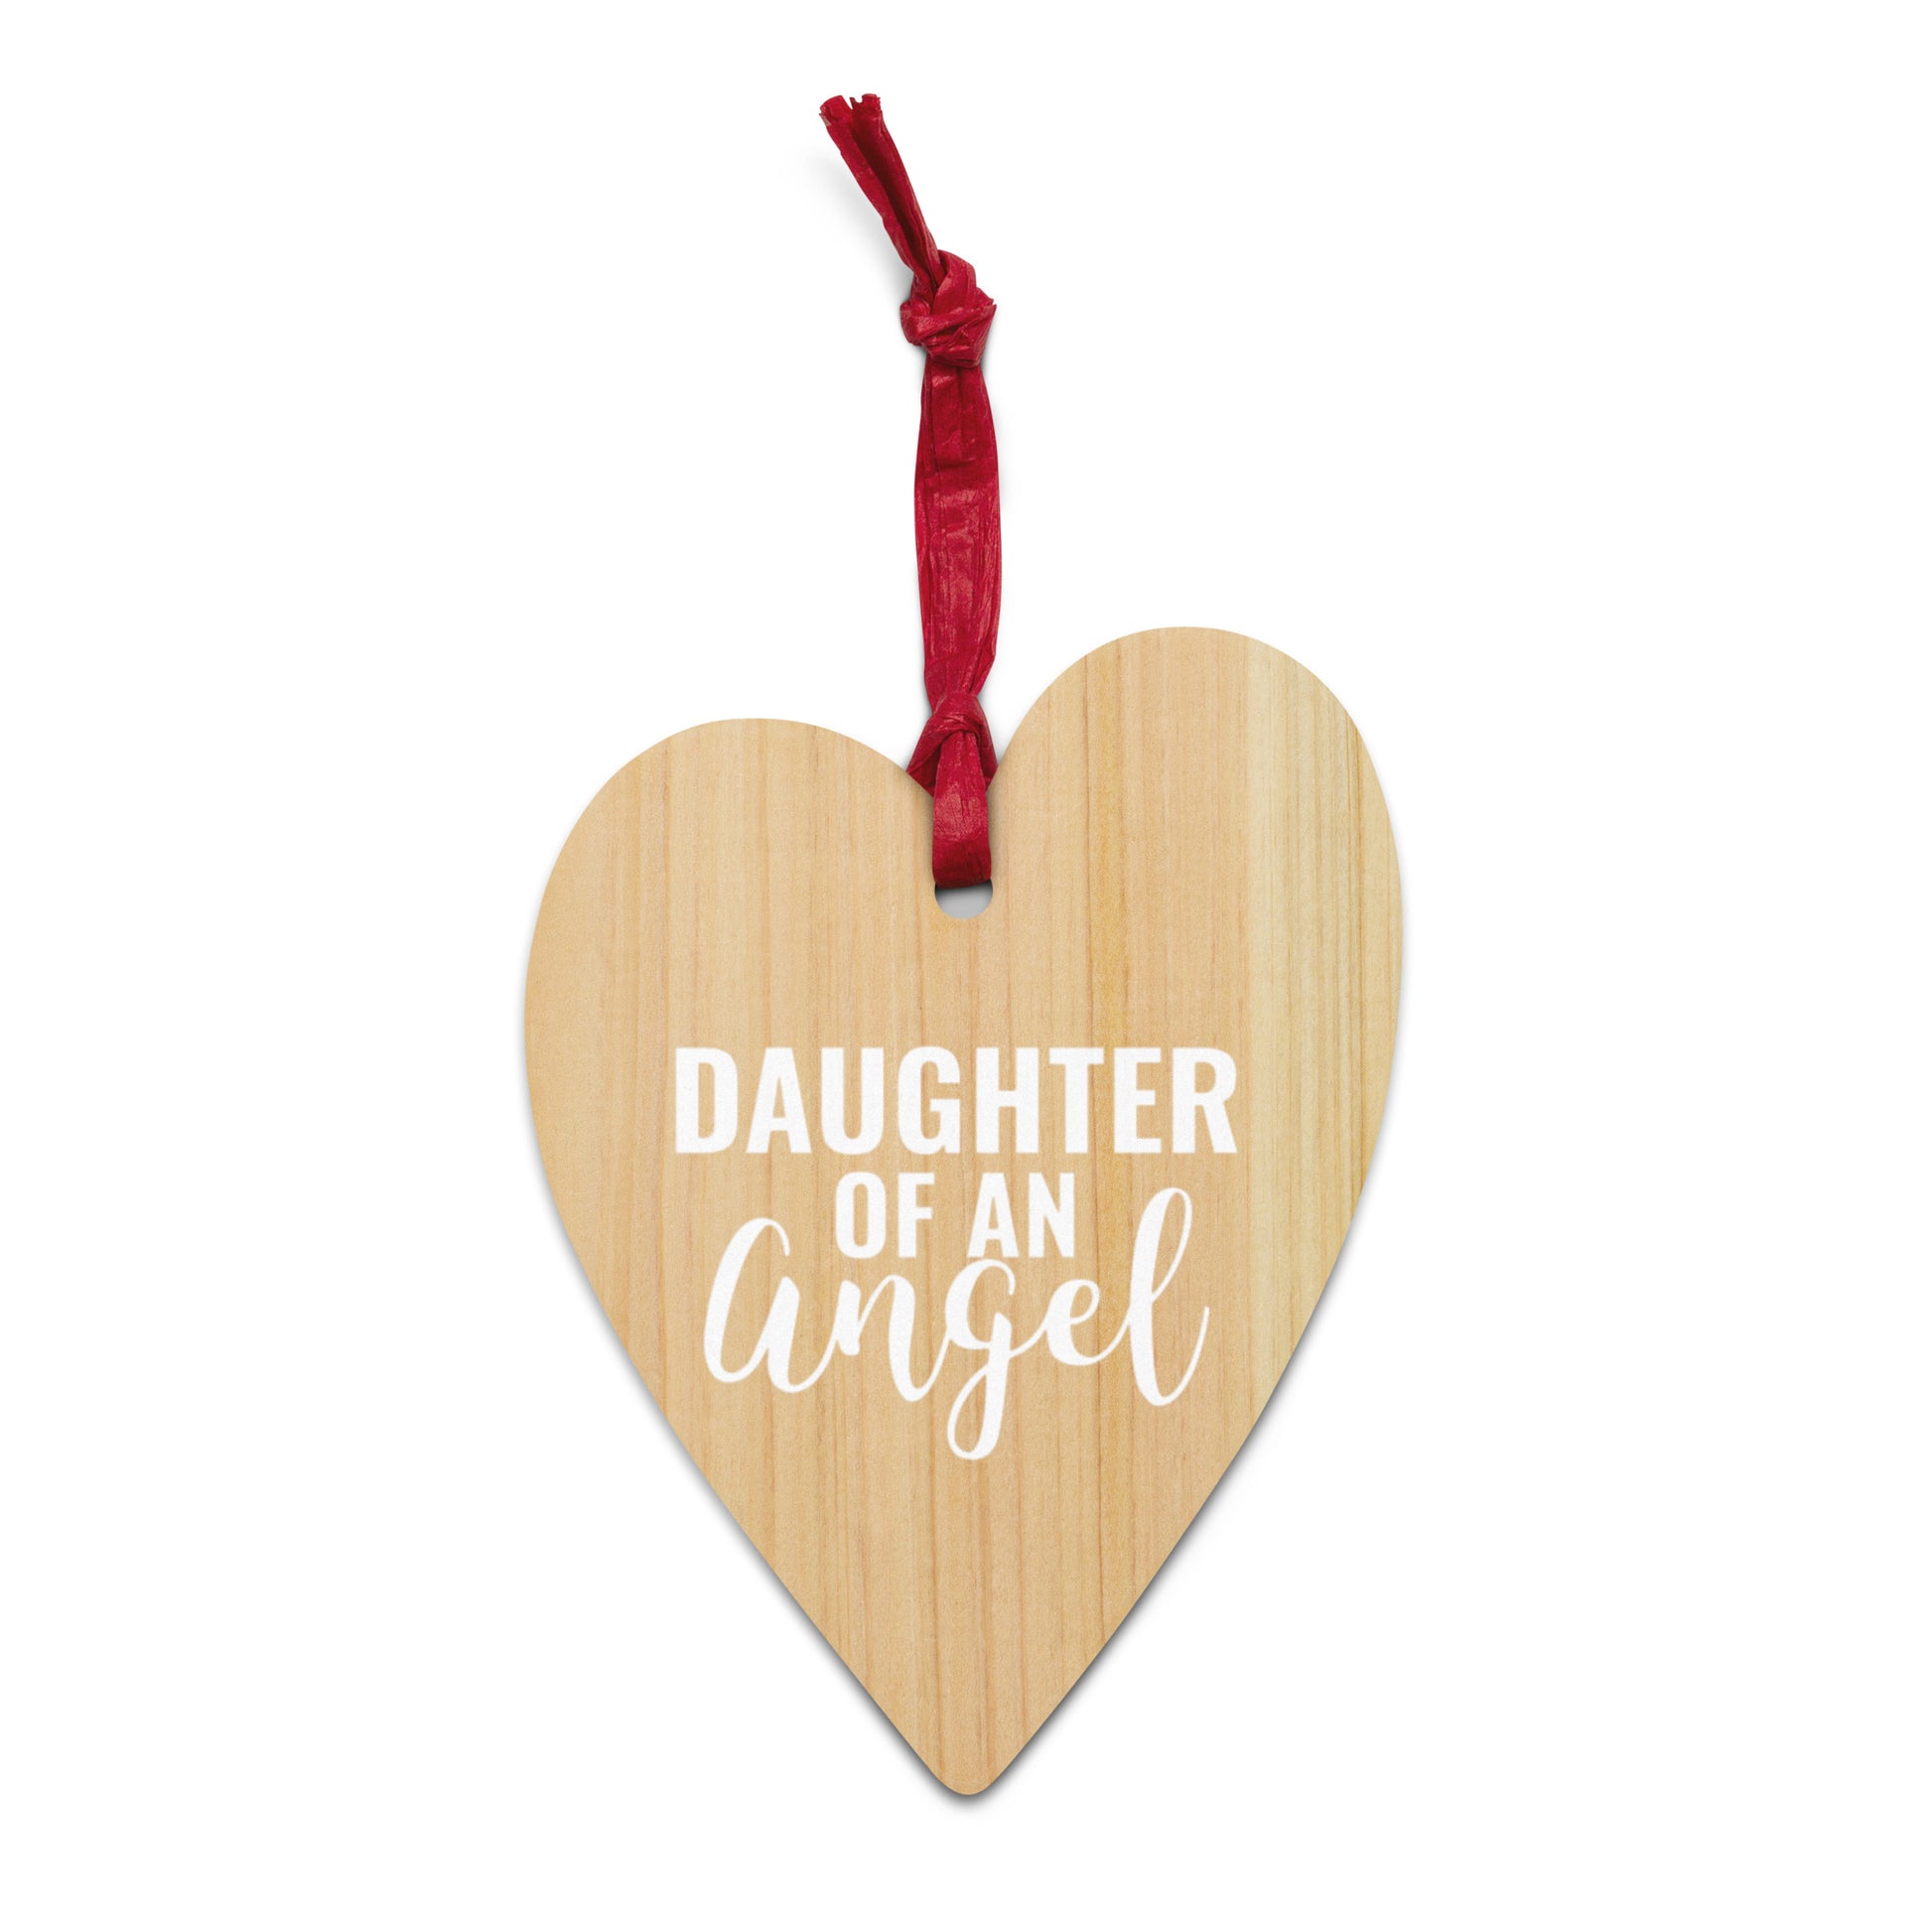 DAUGHTER OF AN ANGEL ORNAMENT - Daughter Of An Angel